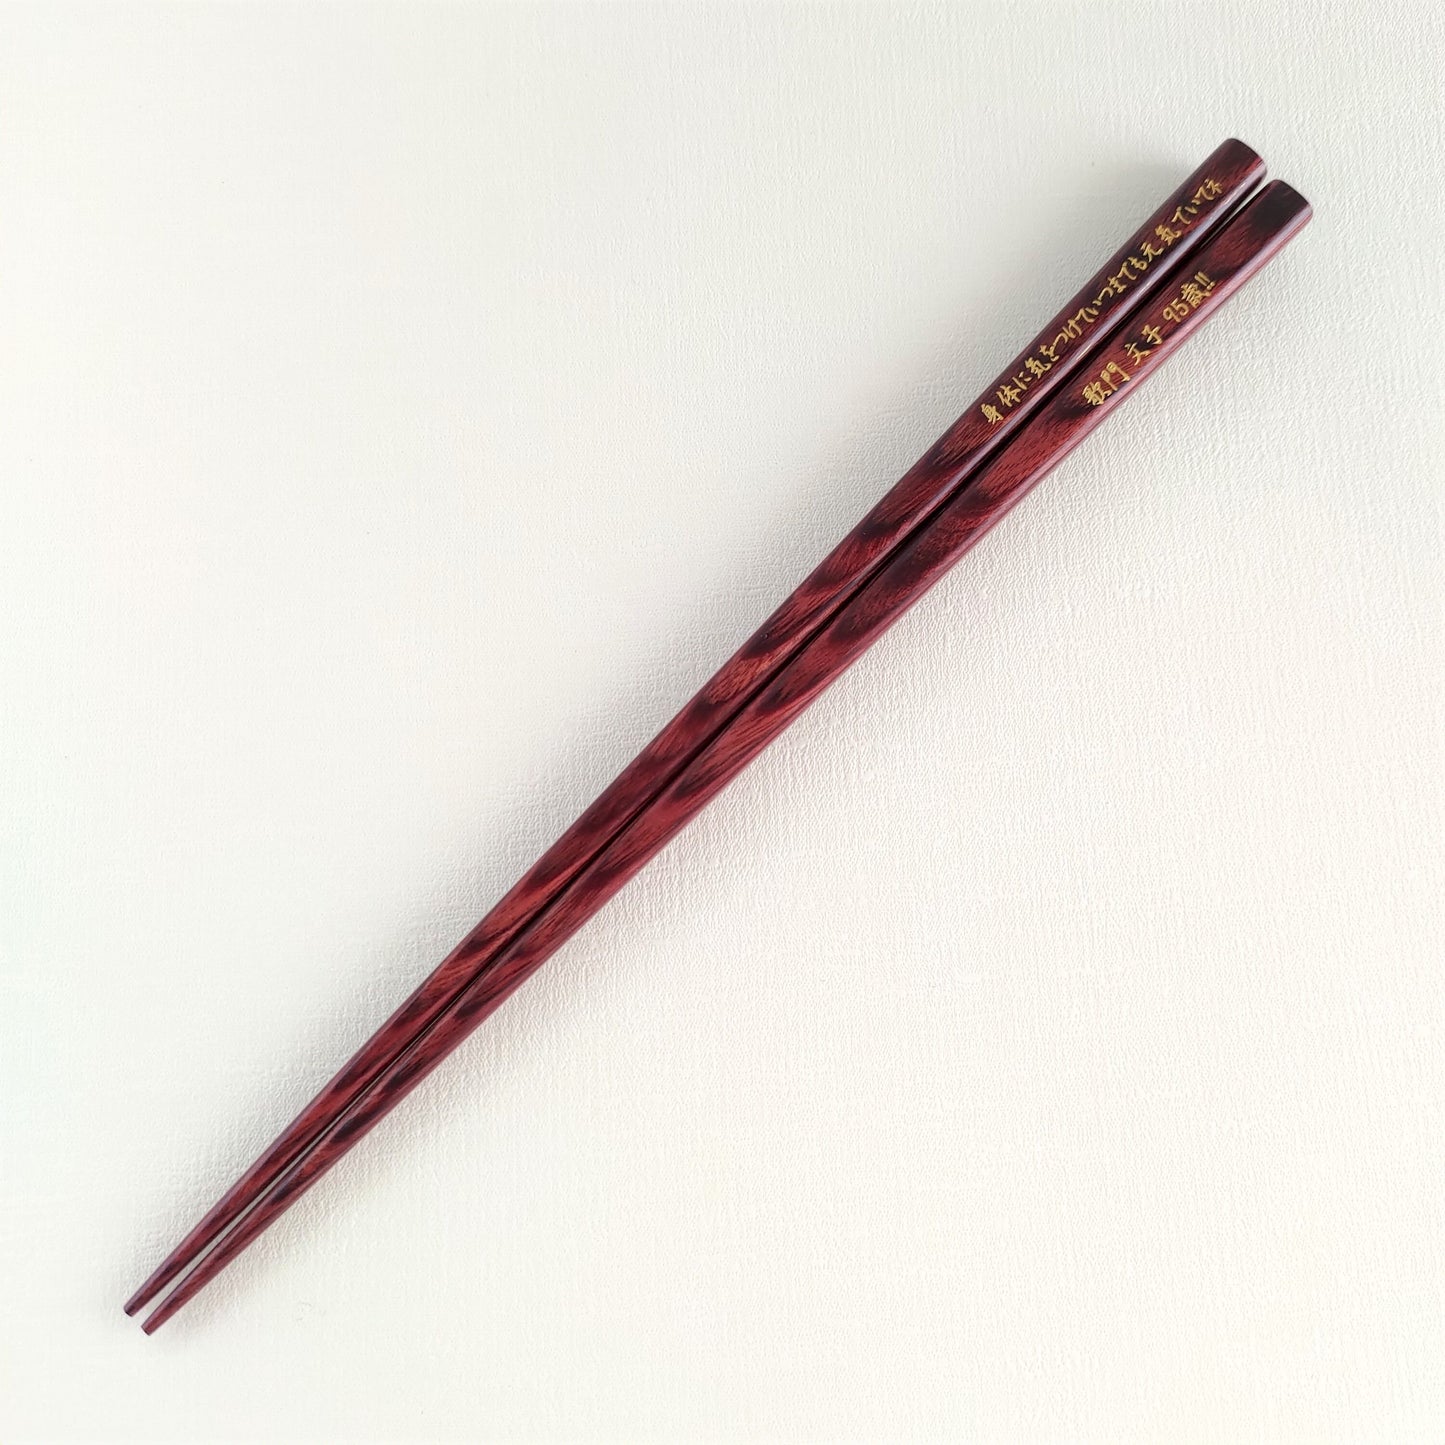 Awesome Japanese chopsticks with soft fur design black brown - DOUBLE PAIR